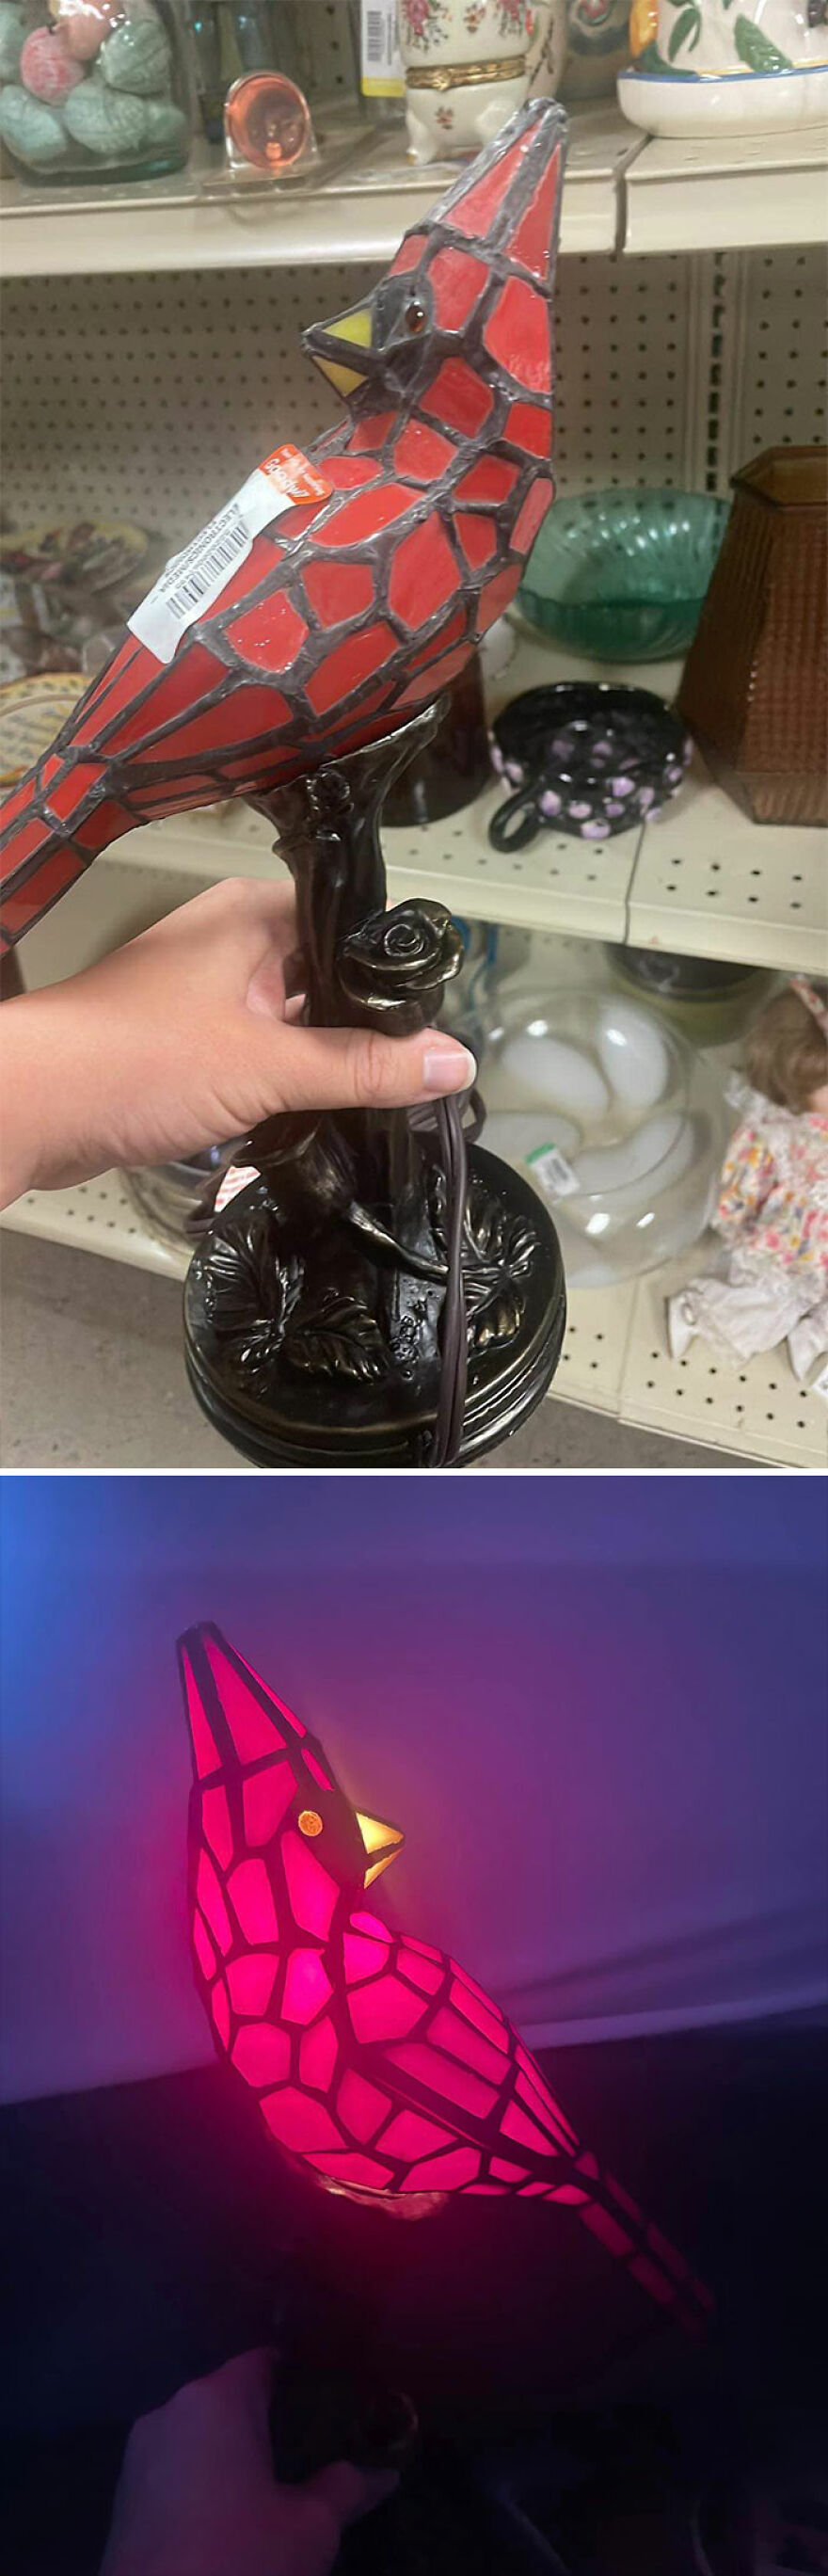 Found This Cool Lamp At Goodwill!